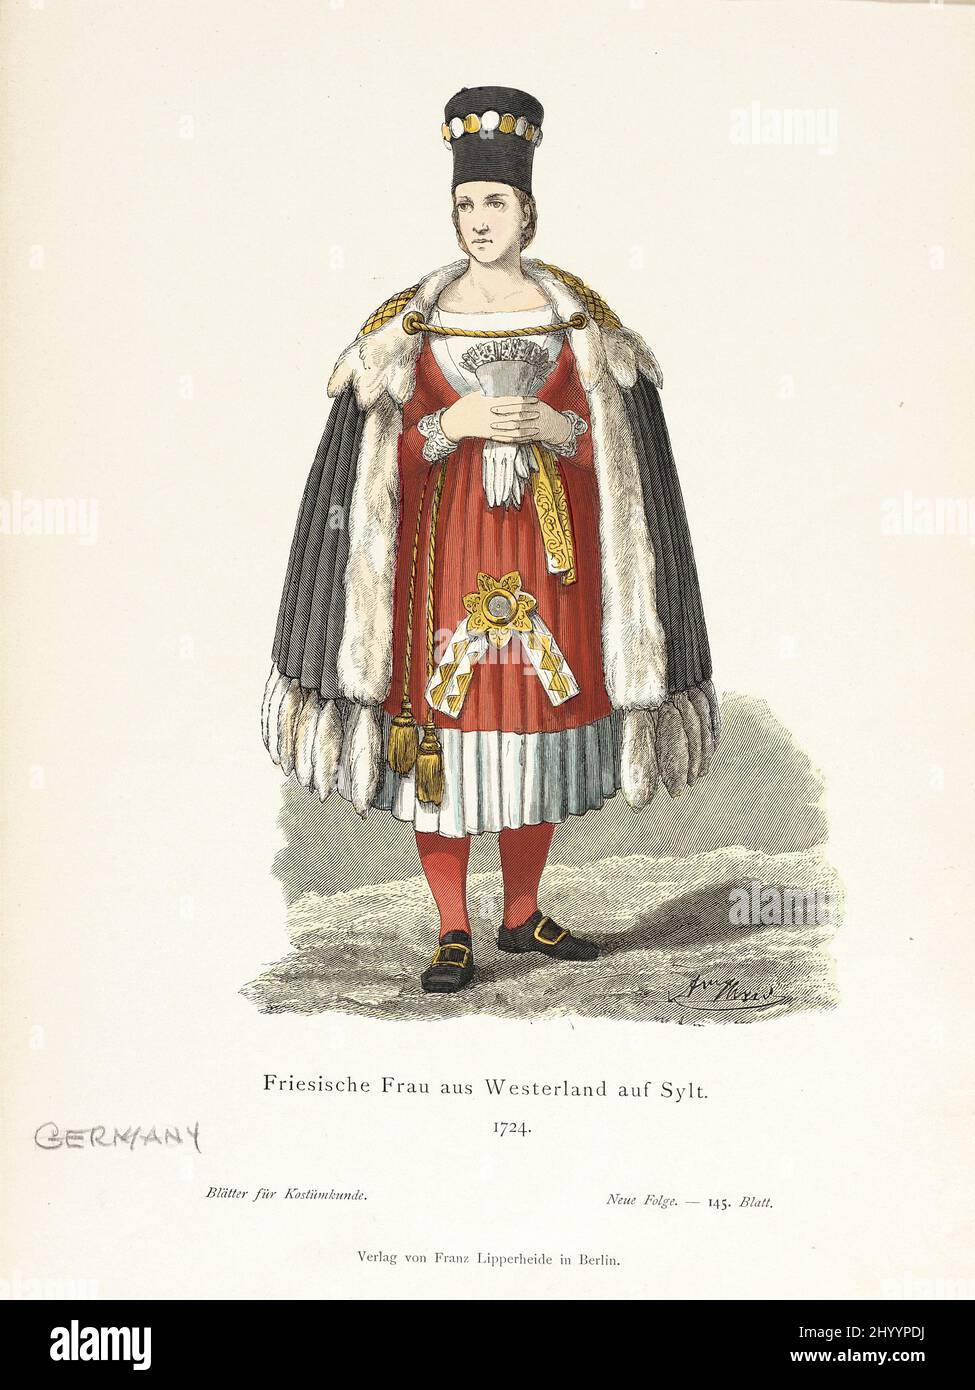 Costume Plate (Friesische Frau aus Westerland auf Sylt). Germany, Berlin, 19th century. Prints; lithographs. Lithograph on paper Stock Photo